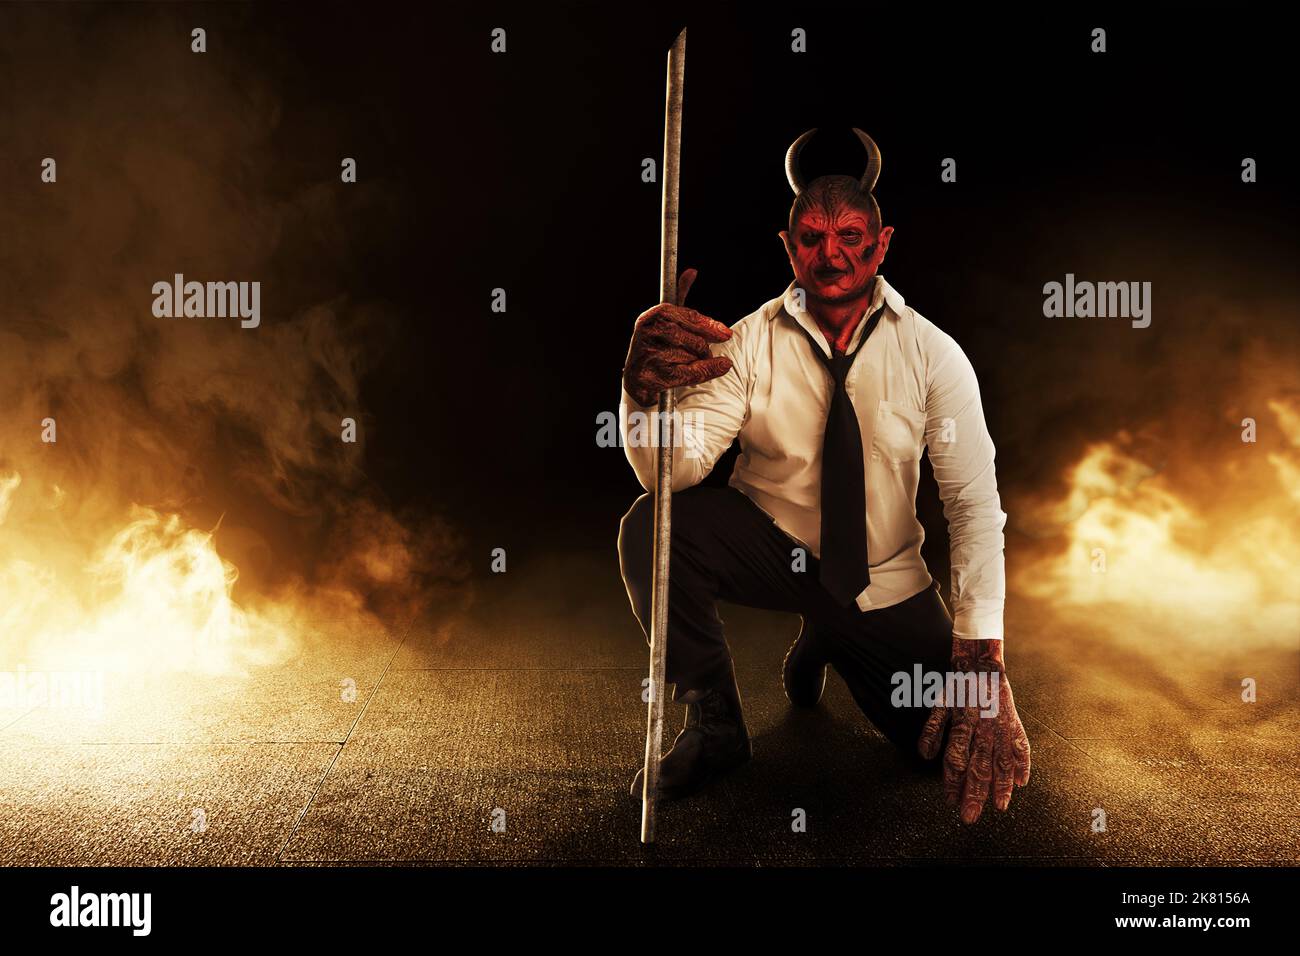 Devilman sitting while holding sticks with fire's background. Halloween concept Stock Photo